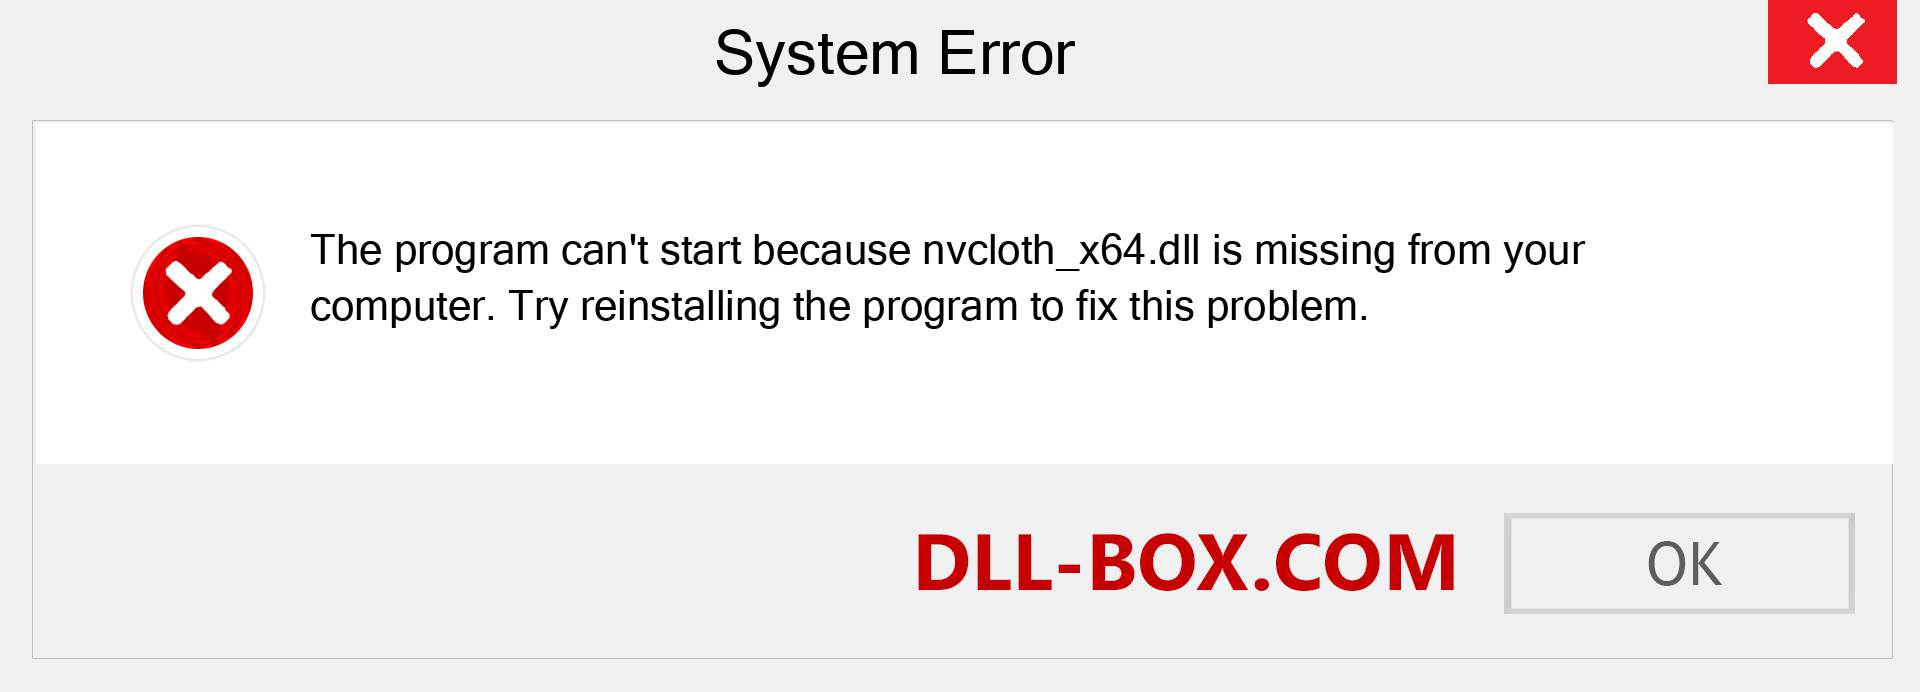  nvcloth_x64.dll file is missing?. Download for Windows 7, 8, 10 - Fix  nvcloth_x64 dll Missing Error on Windows, photos, images